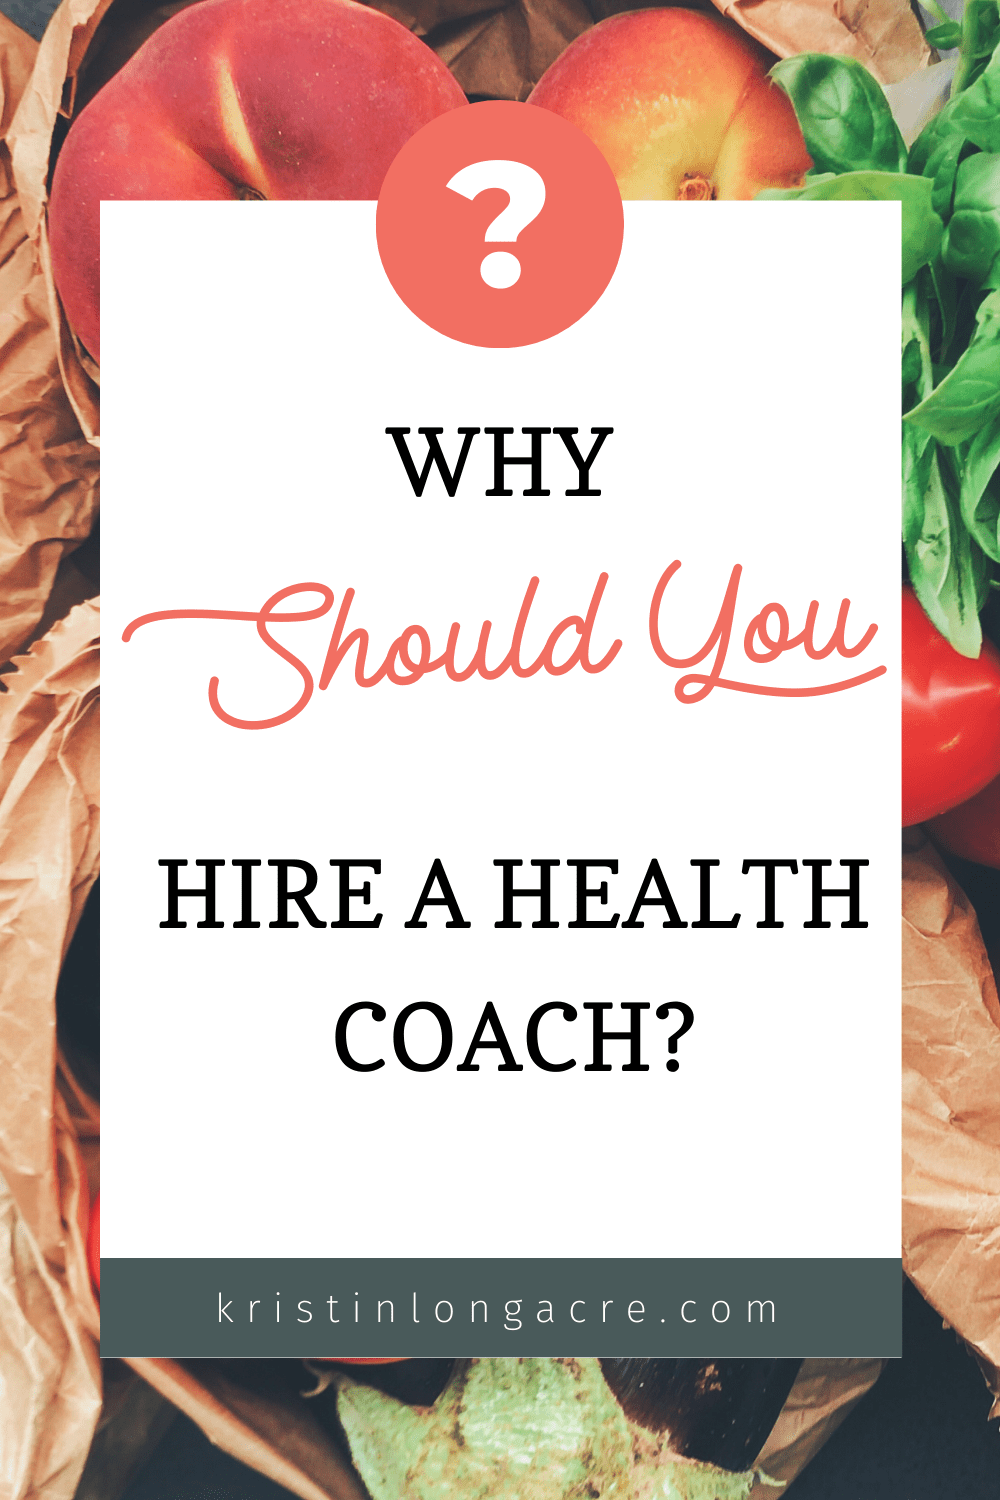 Why Should You Hire A Health Coach